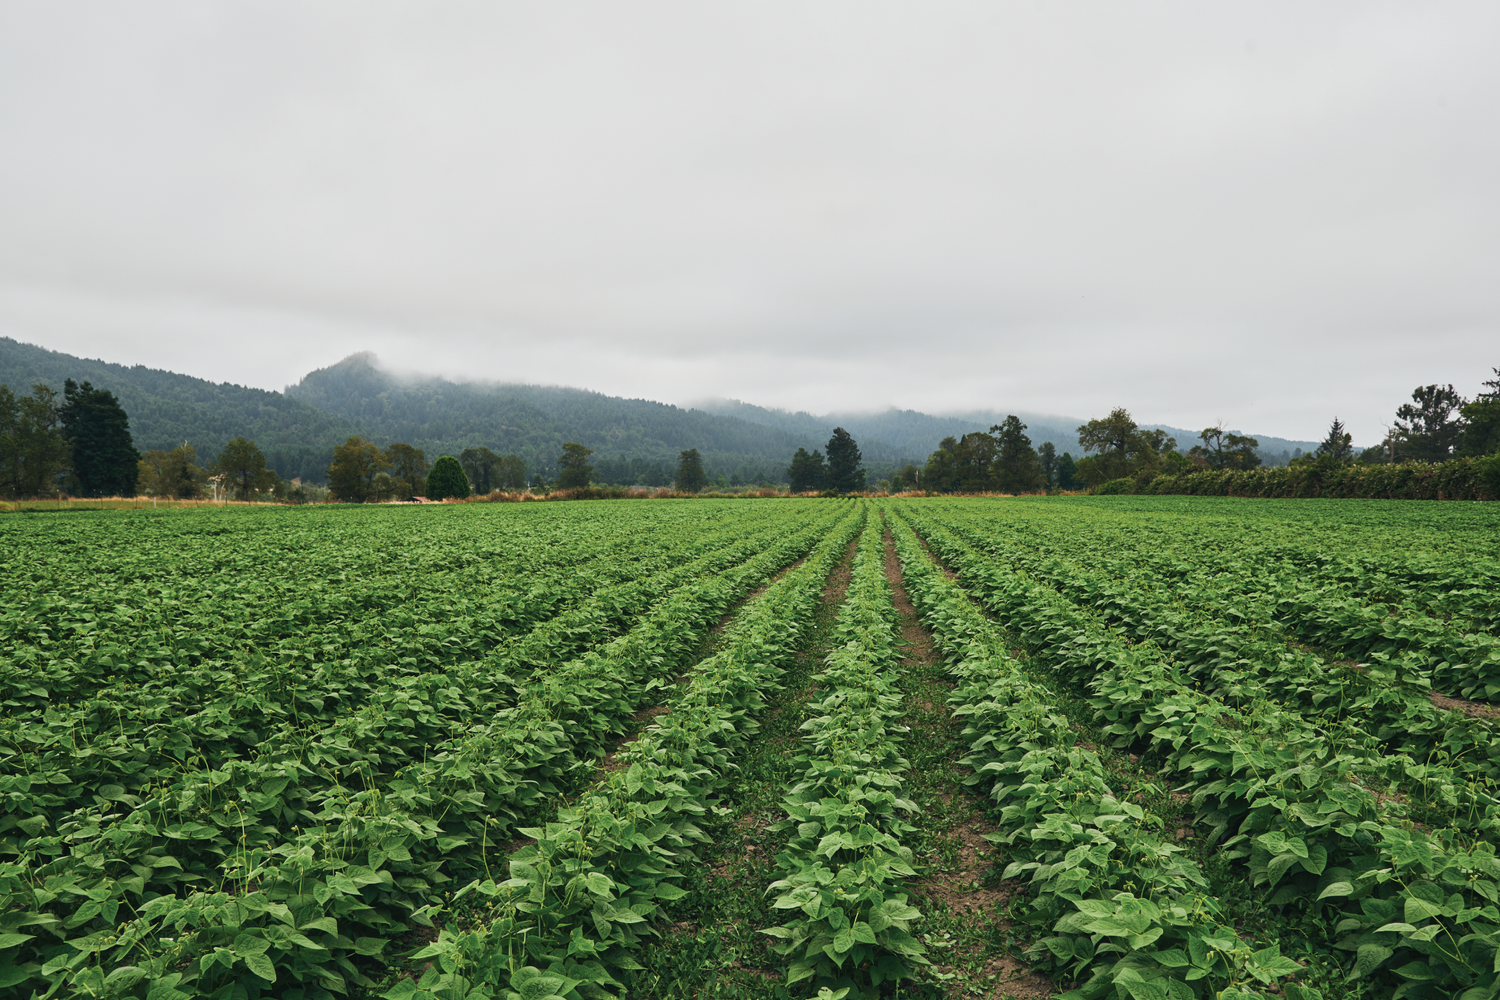 Home page photo for organic dry bean brand, beanstory, showing a farm field with a rows of organic bean crops with lush green leaves with a hilly background of low lying clouds.